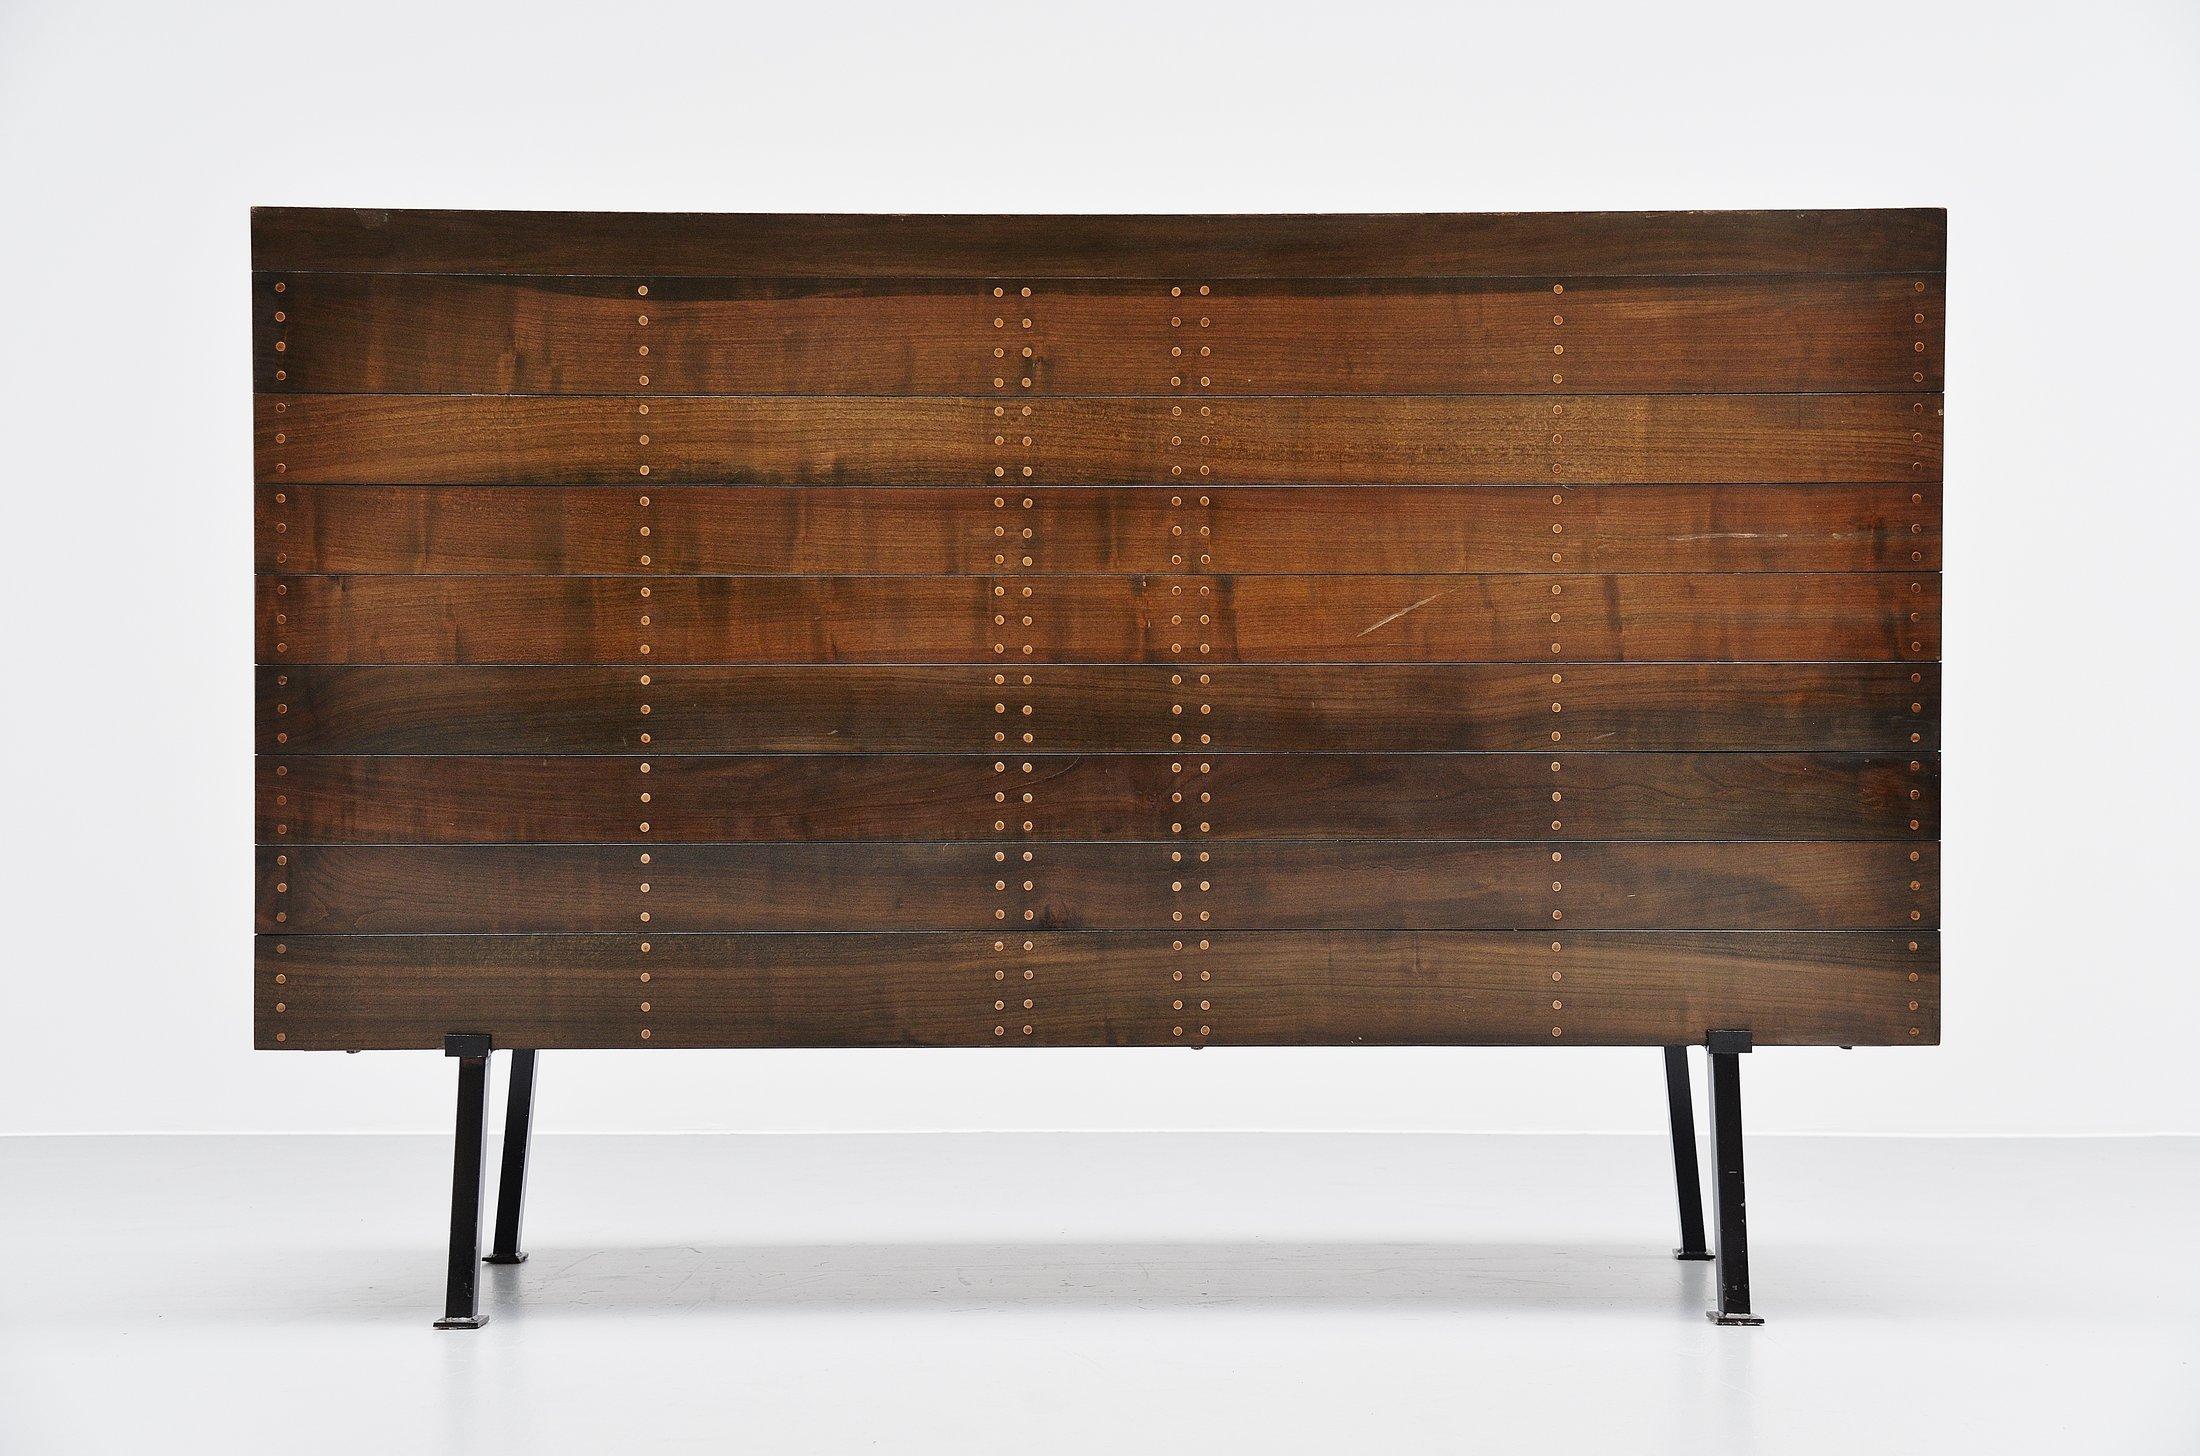 Mid-20th Century Dom Hans van der Laan Bench for Town Hall Budel, 1966 For Sale